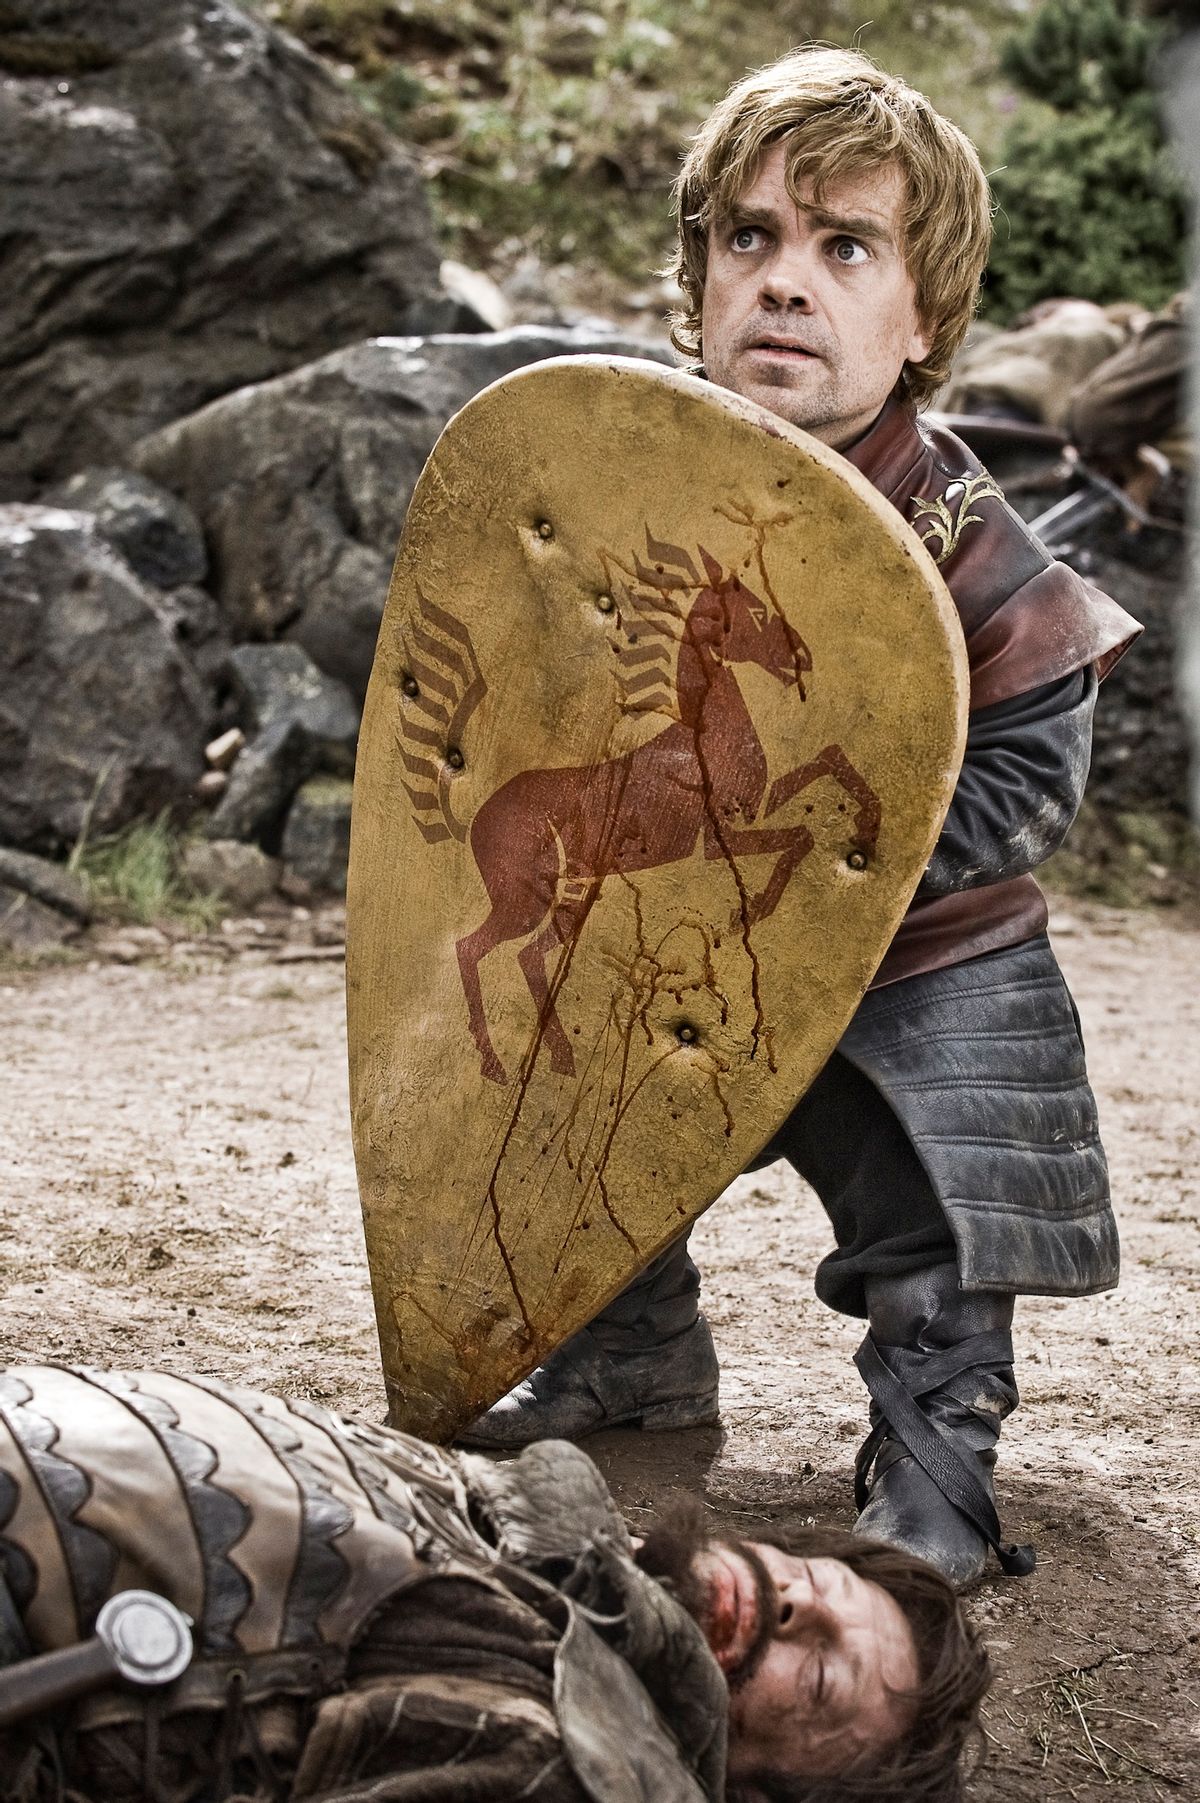 Peter Dinklage as Tyrion in HBO's "Game of Thrones."